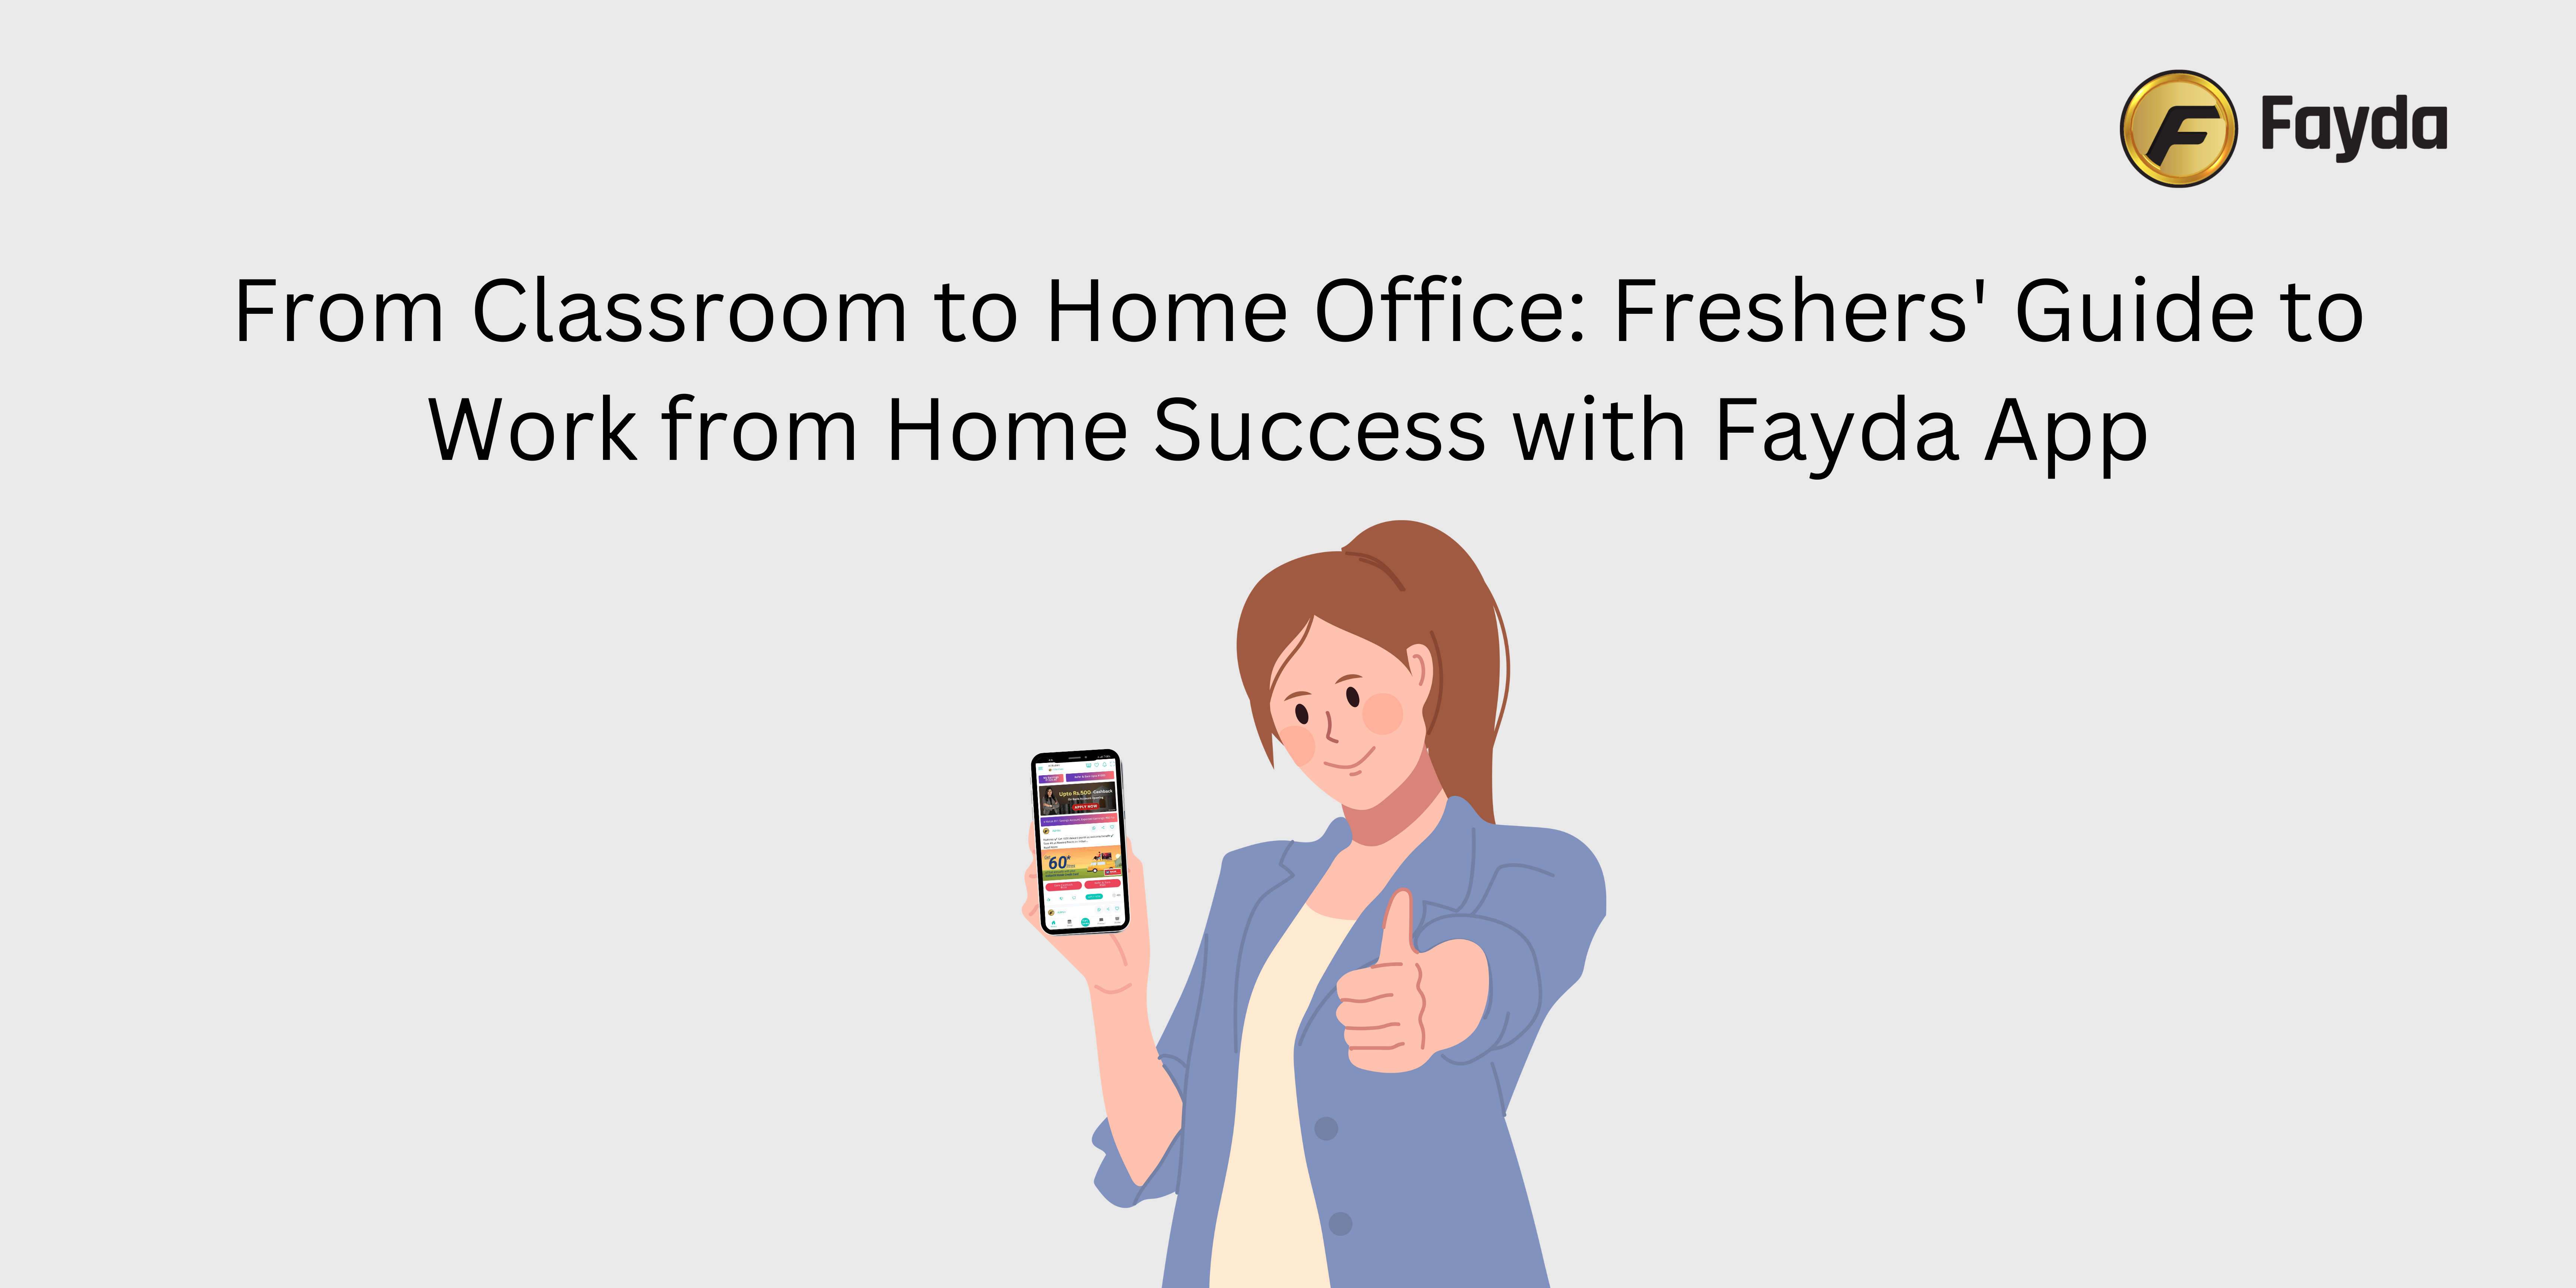 From Classroom to Home Office: Freshers' Guide to Work from Home Success with Fayda App